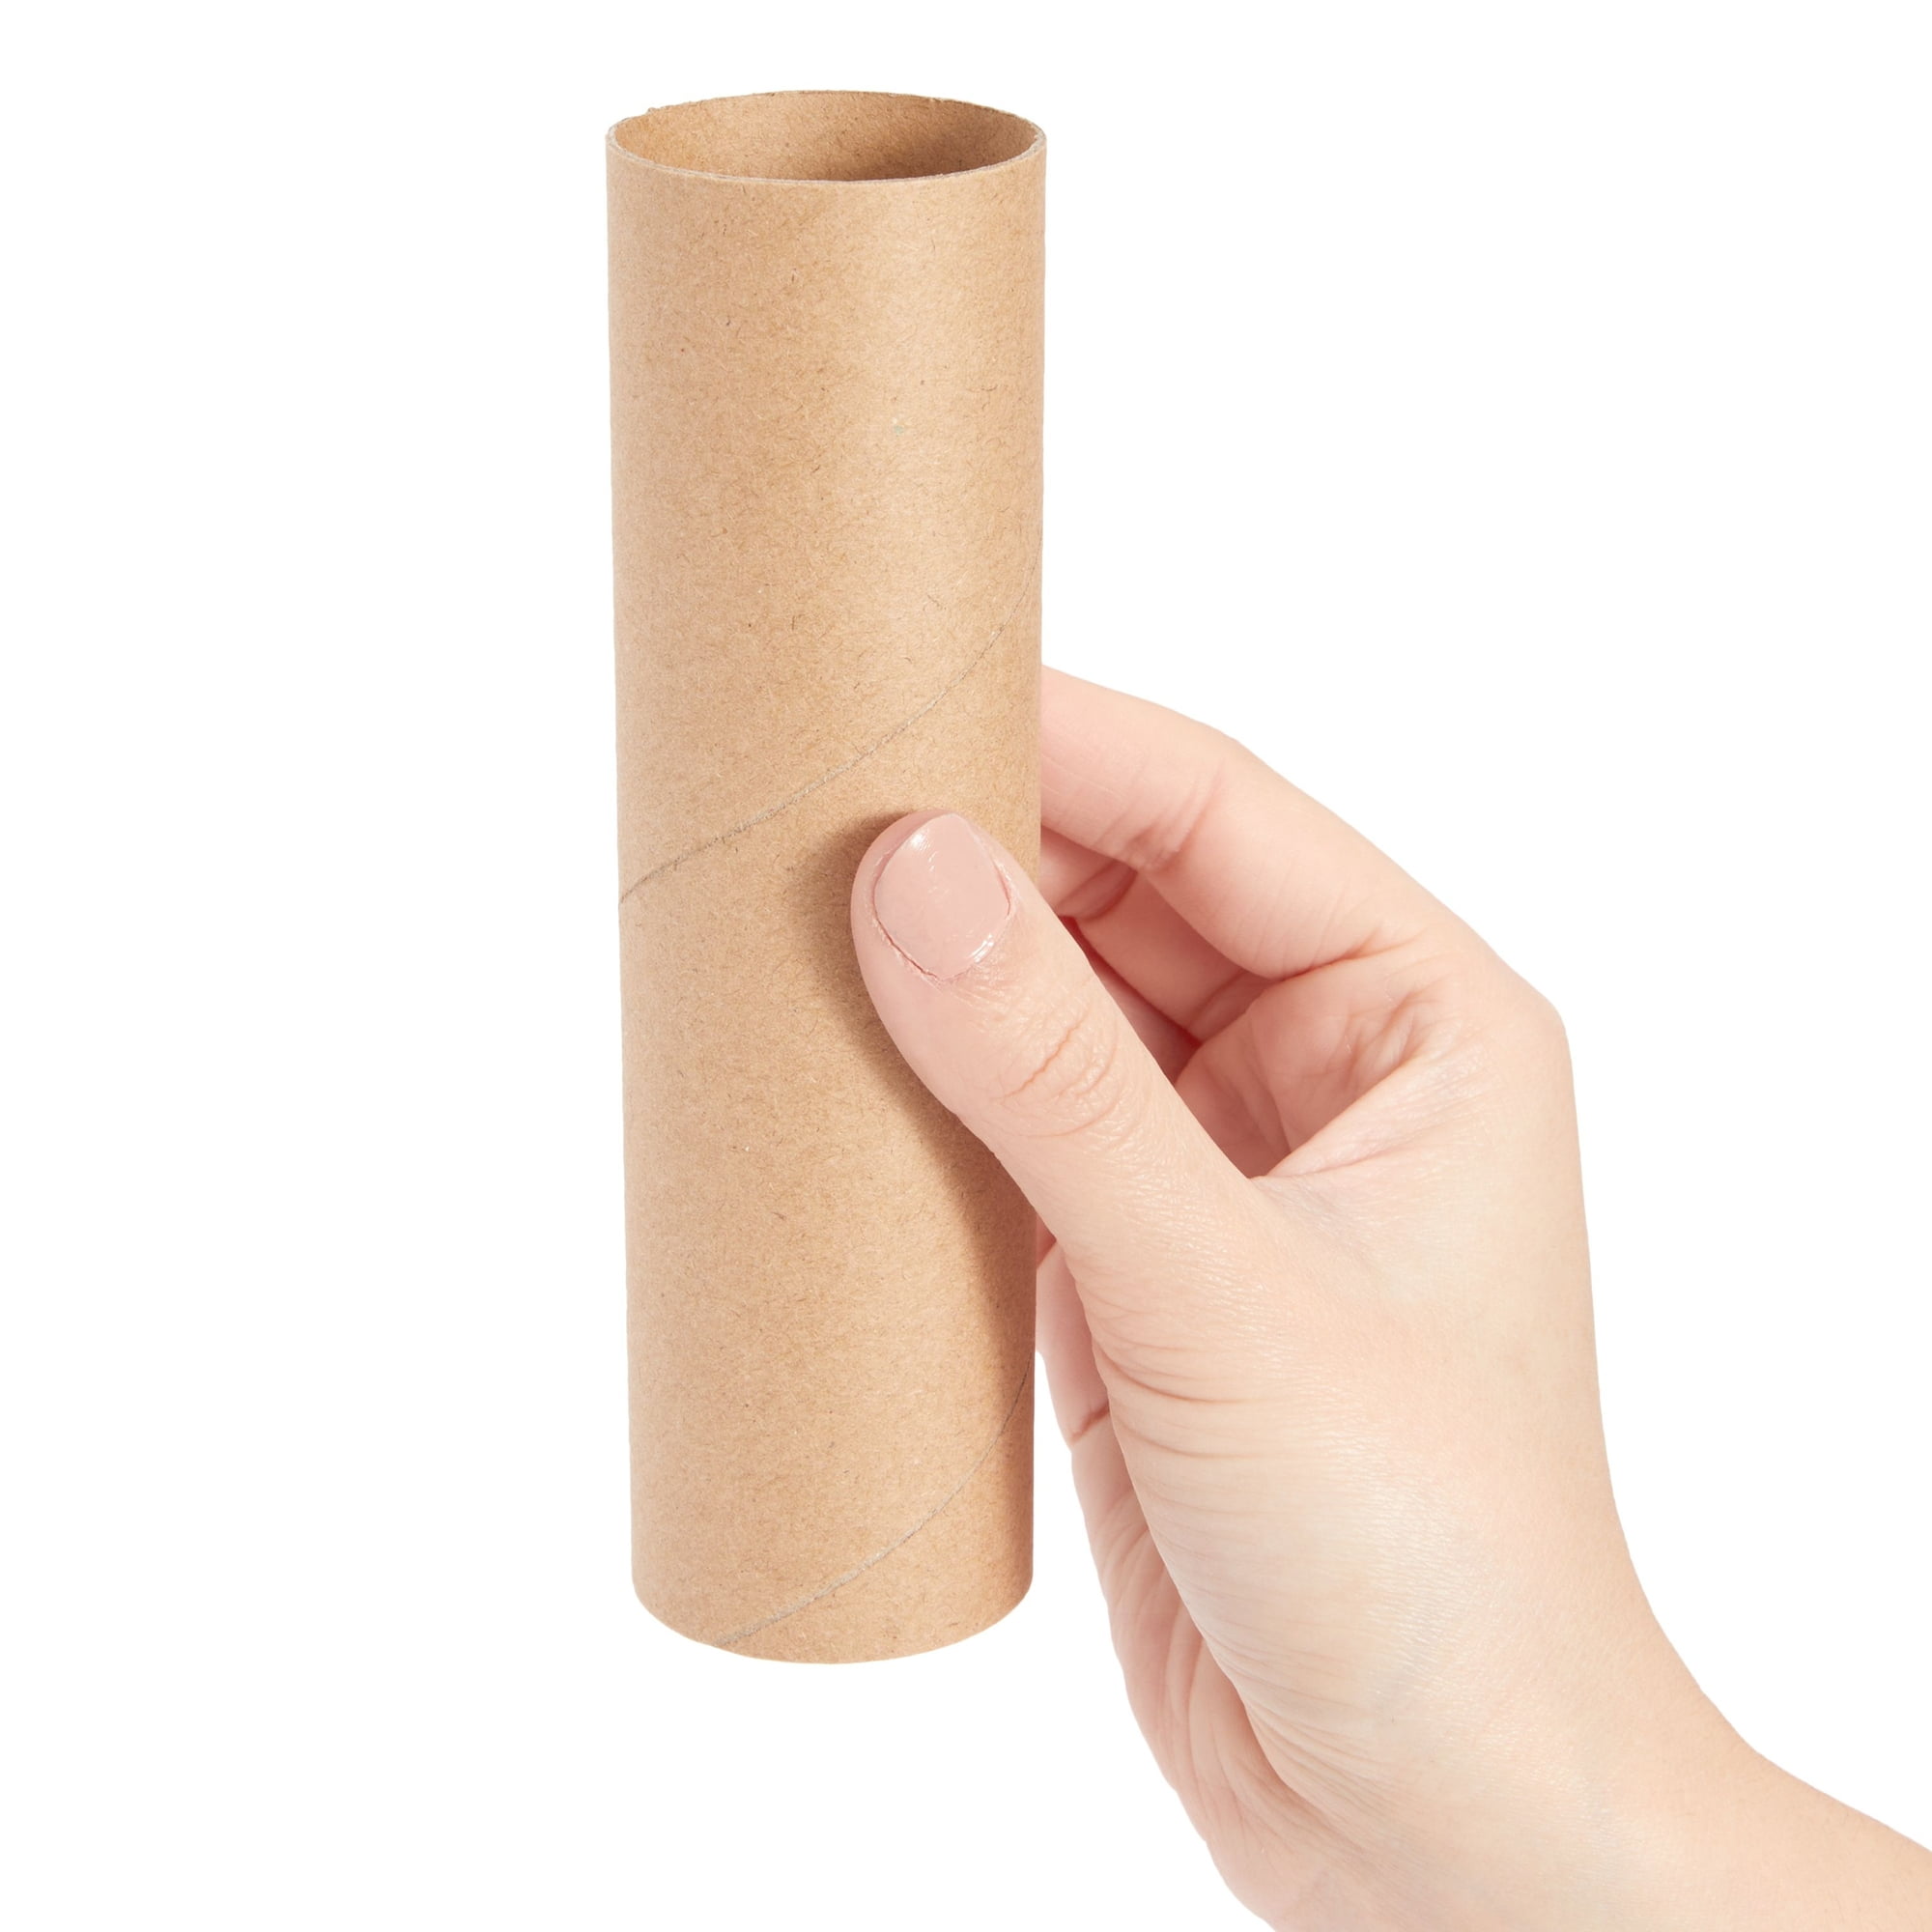 Bright Creations 36 Brown Empty Paper Towel Rolls, Cardboard Tubes